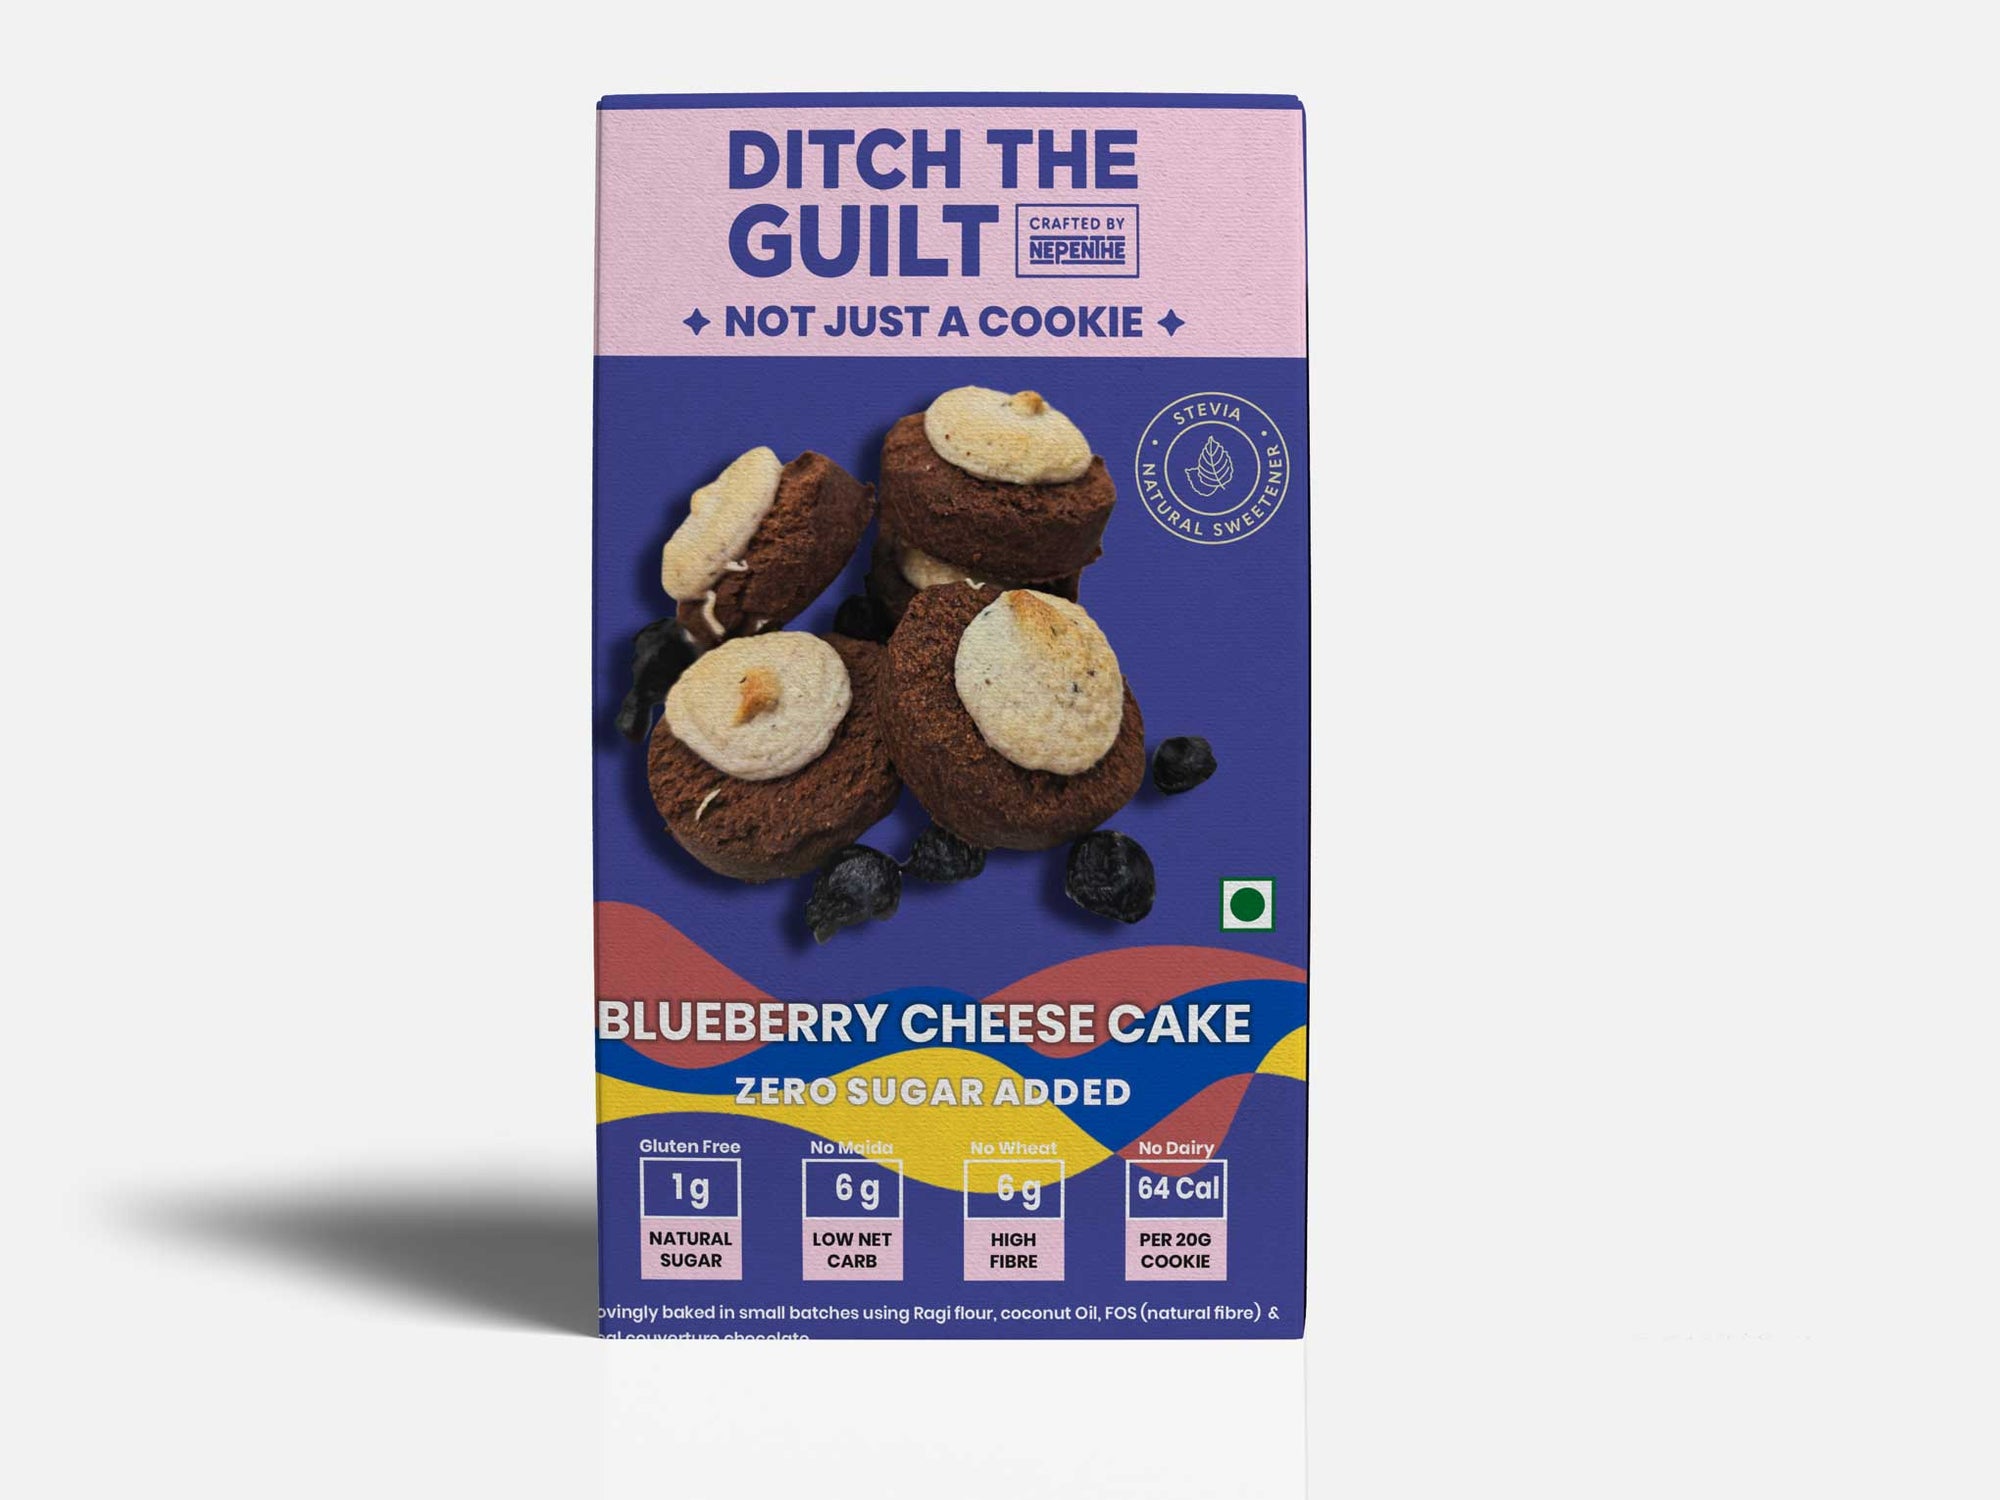 Eclair Cookie - Blueberry Vegan Cheese Cake Cookies Glimmer Box- Ragi Flour & Chocolate - Sugar Free Cookies - Stevia Sweetened - Lower Calories than Regular Cookies with Sugar - Low Net Carbs - 200g - ditchtheguilt.fit